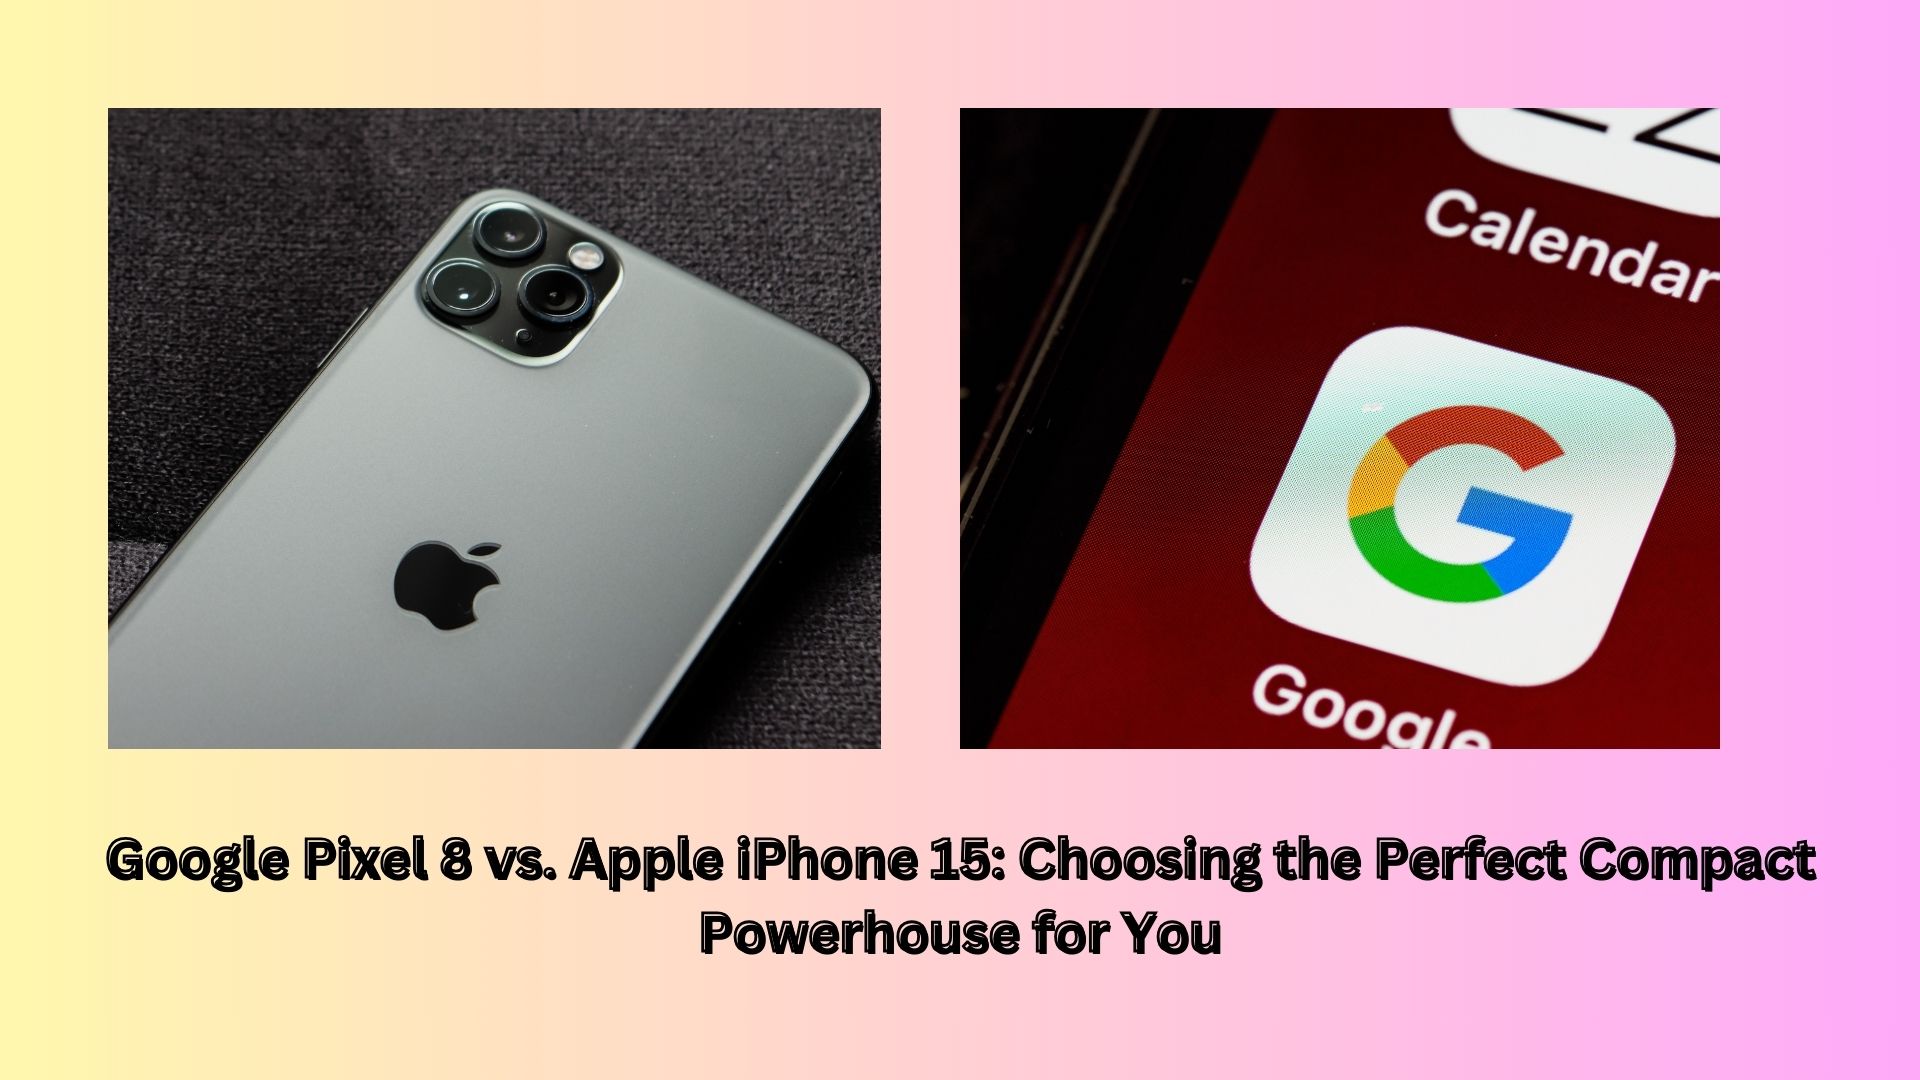 Google Pixel 8 vs. Apple iPhone 15: Choosing the Perfect Compact Powerhouse for You